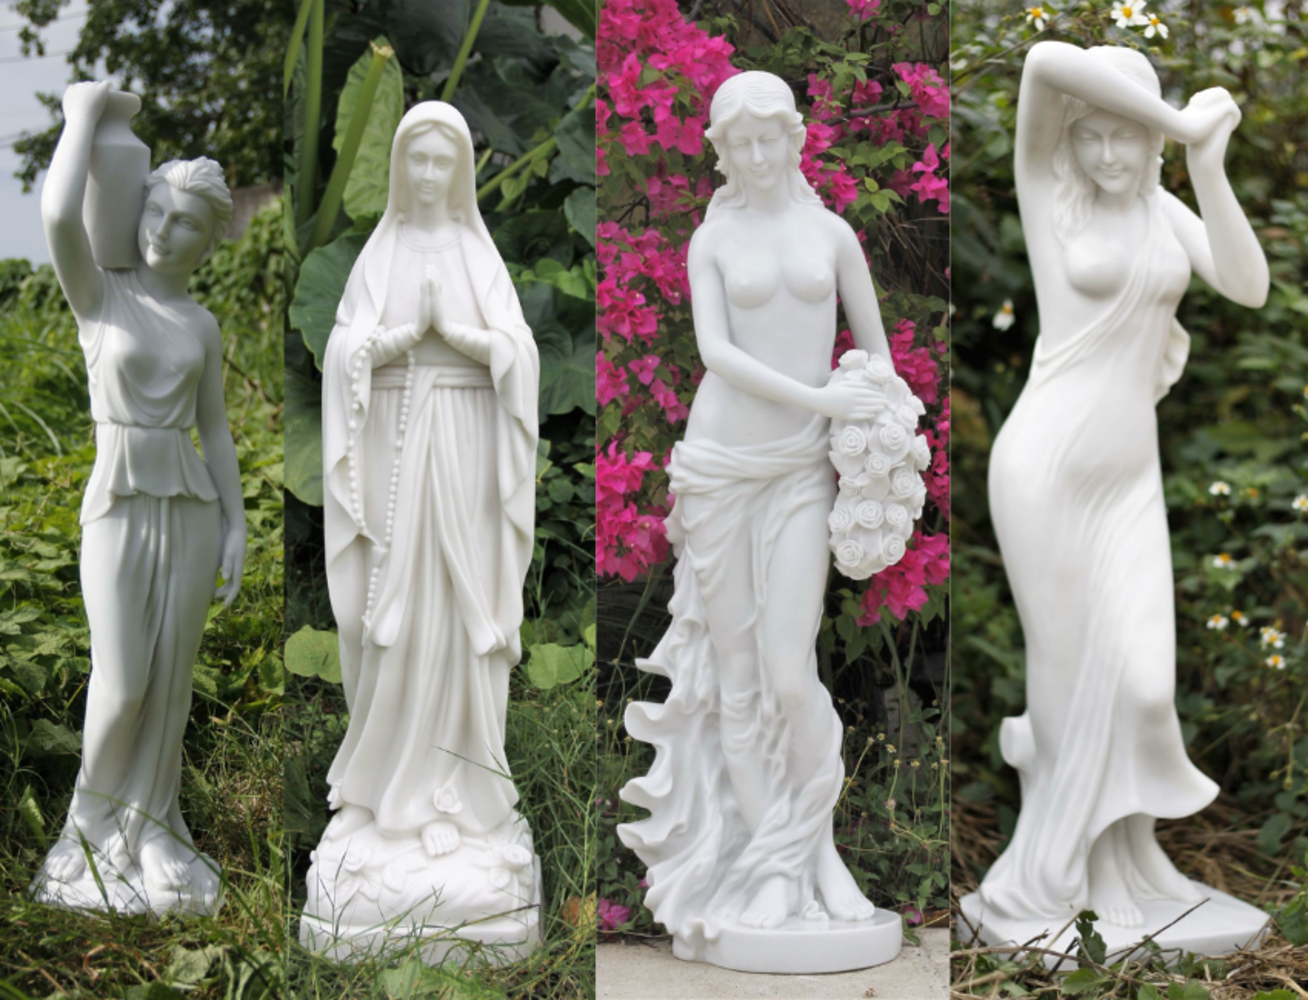 EXCLUSIVE WHOLESALE COLLECTION OF GARDEN ART STATUES / ORNAMENTS / SCULPTURES & LAUREL HEDGING PLANTS! SALE Ends Friday 7th July from 10am